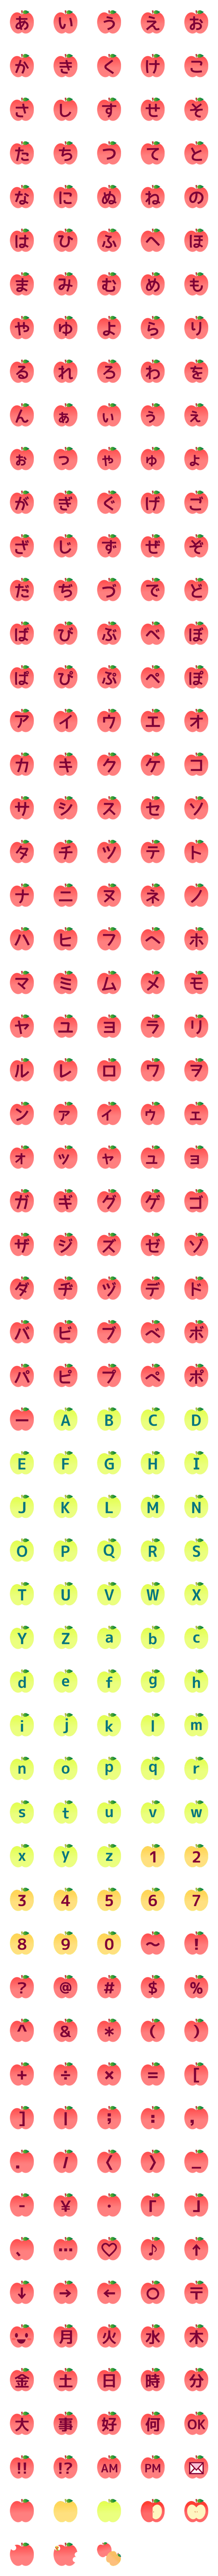 [LINE絵文字]かわいいリンゴのデコ文字！！の画像一覧